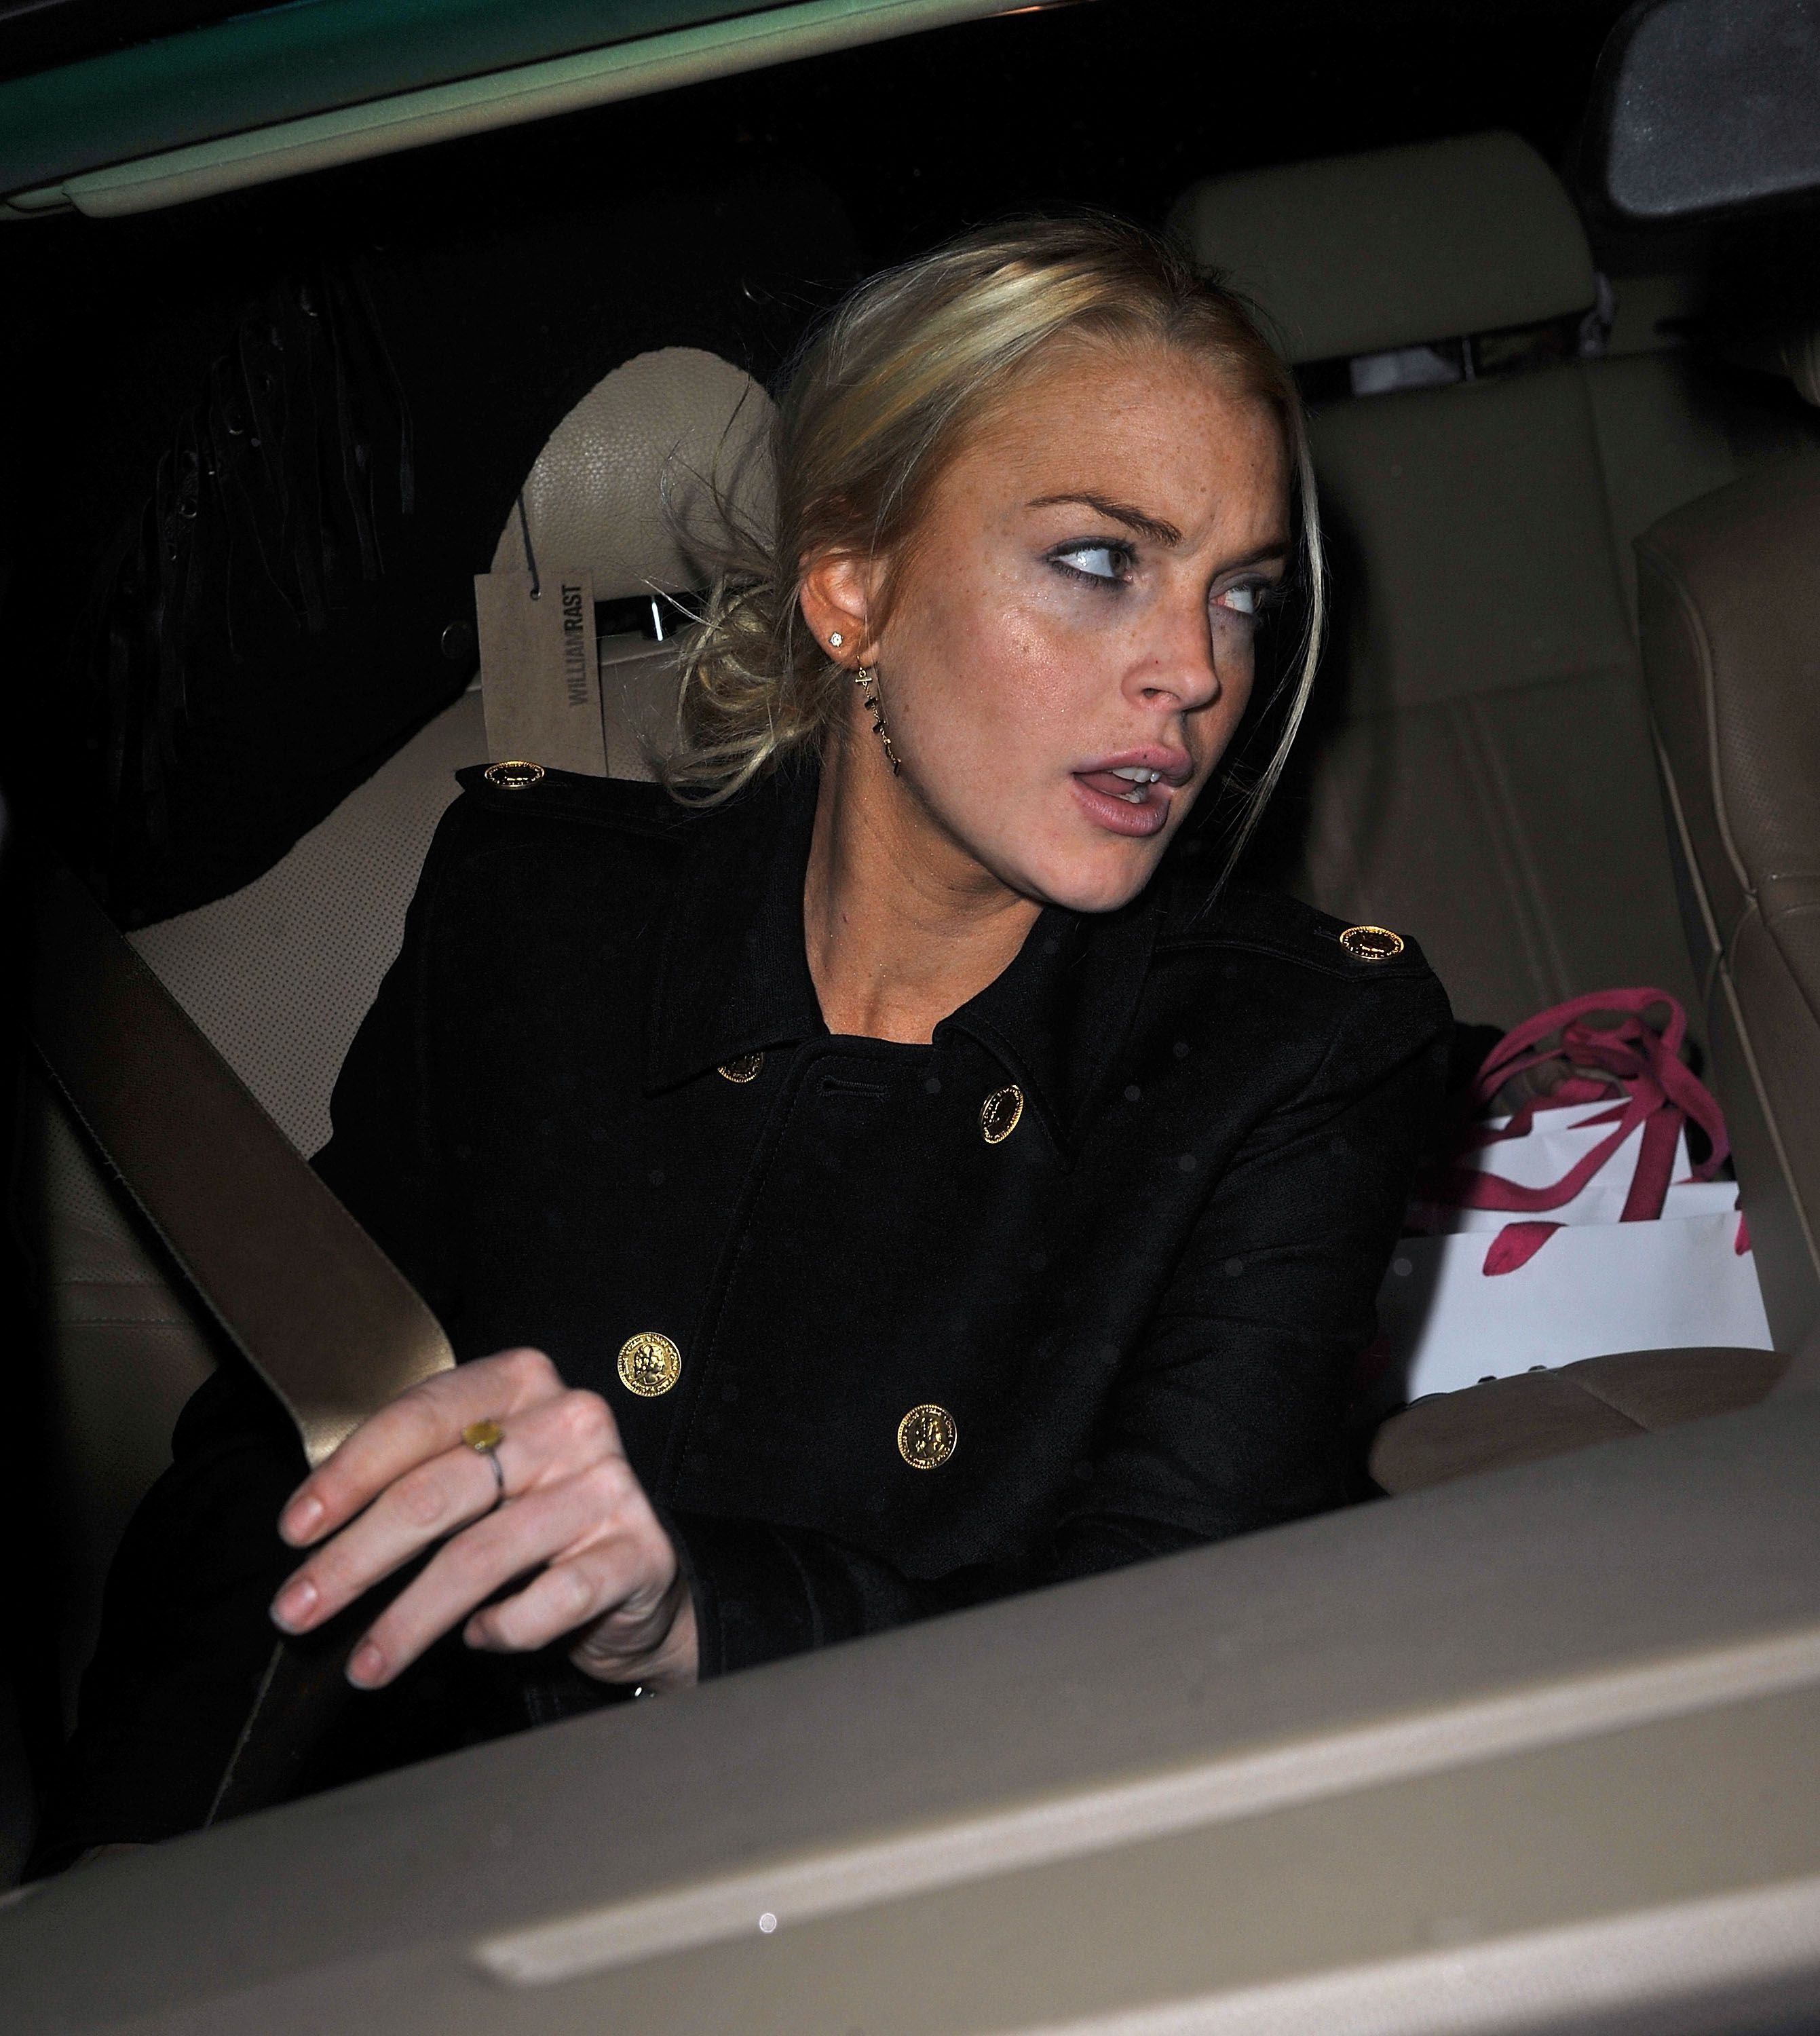 Lindsay Lohan seen leaving Intermix in SoHo on December 28, 2009 in New York City. | Source: Getty Images